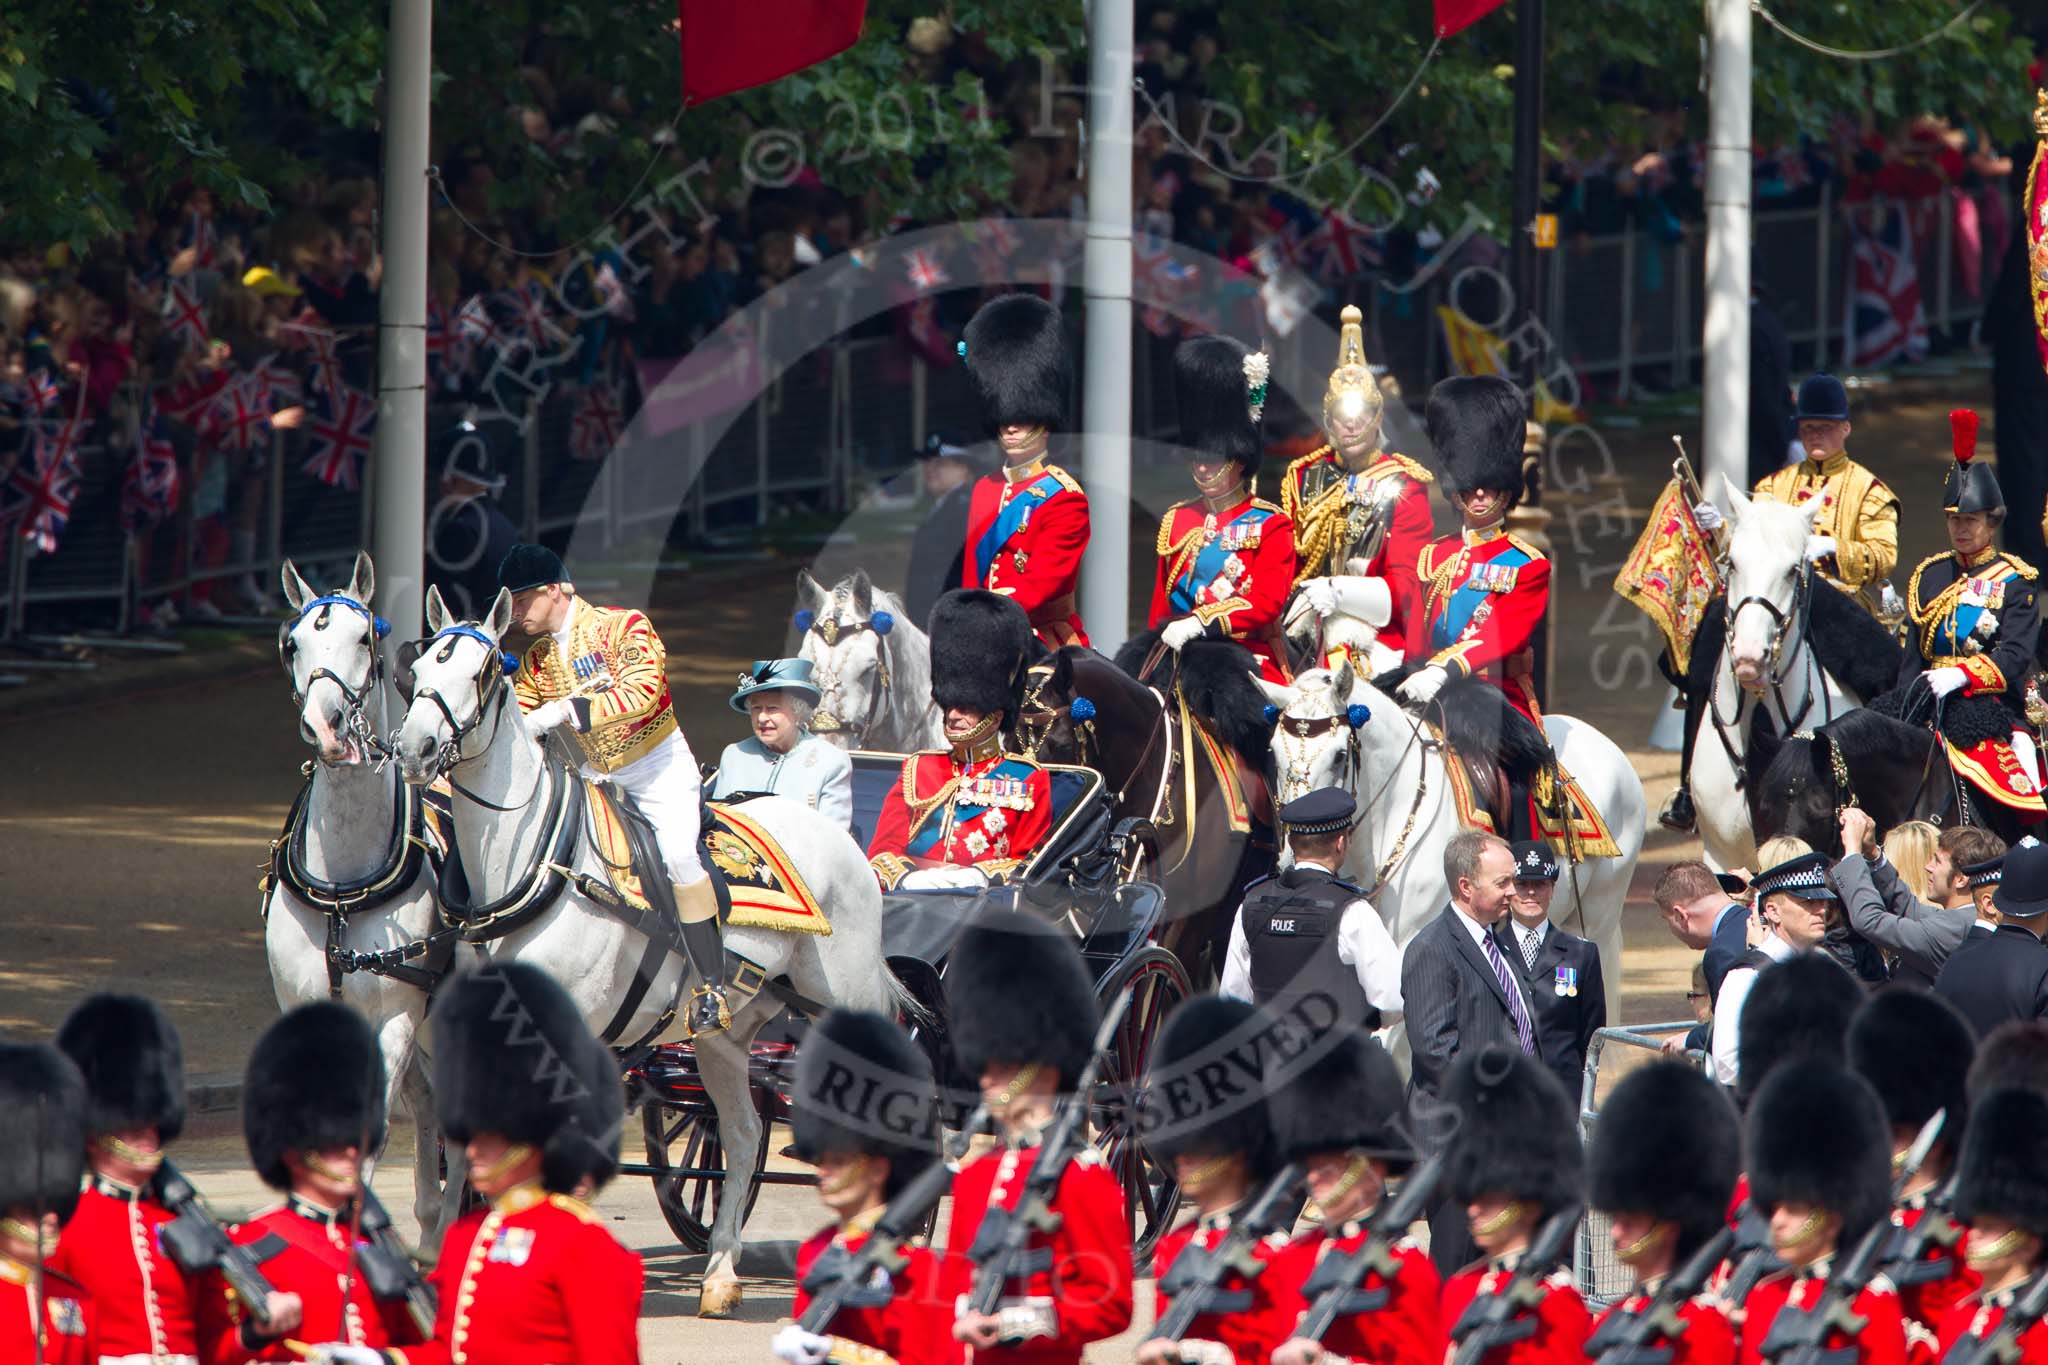 Trooping the Colour 2011: HM The Queen arriving at Horse Guards Parade for her Birthday Parade. Behind her the four Royal Colonels, from the left HRH Prince William, The Duke of Cambridge, HRH Prince Charles, The Prince of Wales, HRH Prince Edward, The Duke of Kent, and HRH Princess Anne, The Princess Royal..
Horse Guards Parade, Westminster,
London SW1,
Greater London,
United Kingdom,
on 11 June 2011 at 10:58, image #111